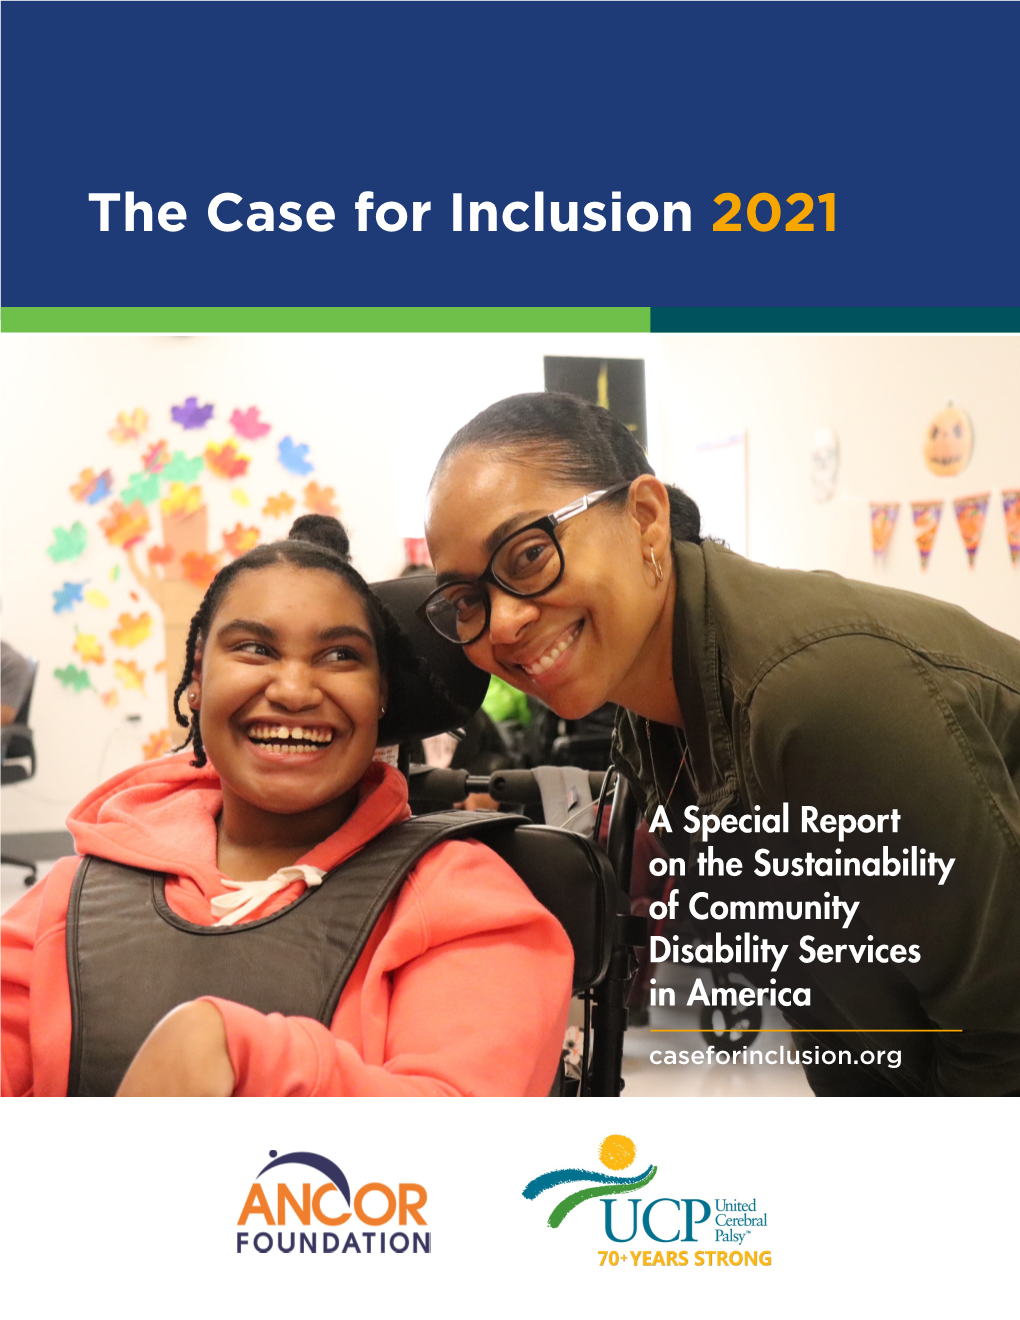 The Case for Inclusion 2021